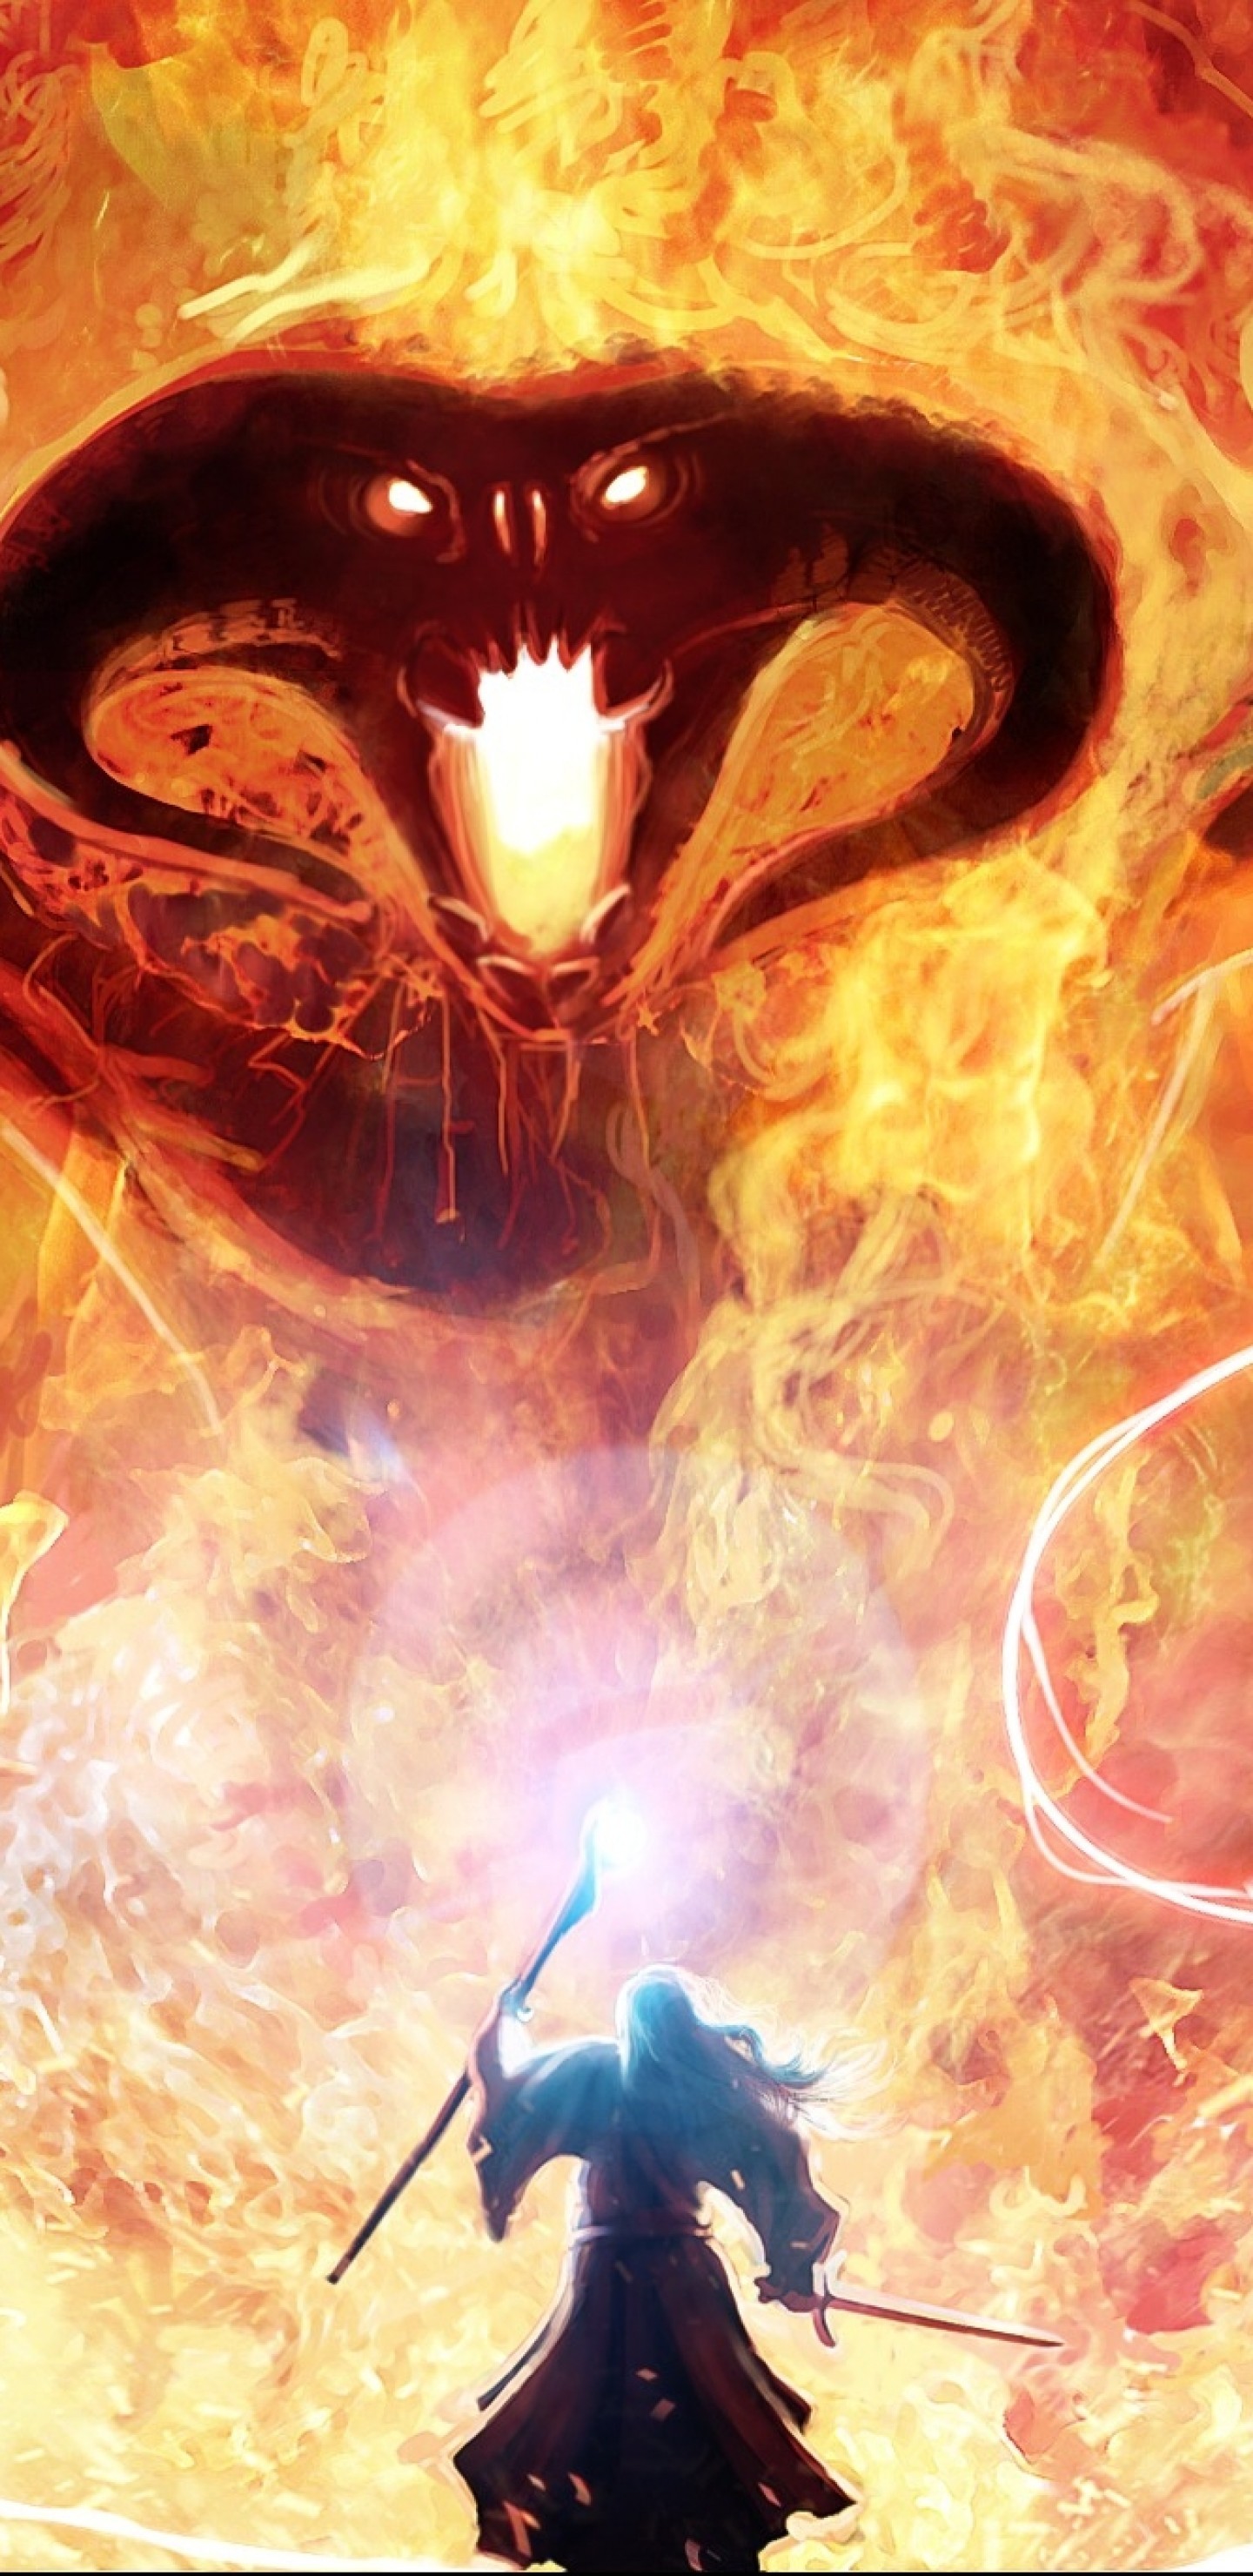 1440x2960 Lord Of The Rings, Balrog, Gandalf, Fire, Tolkien, Magic, Monster